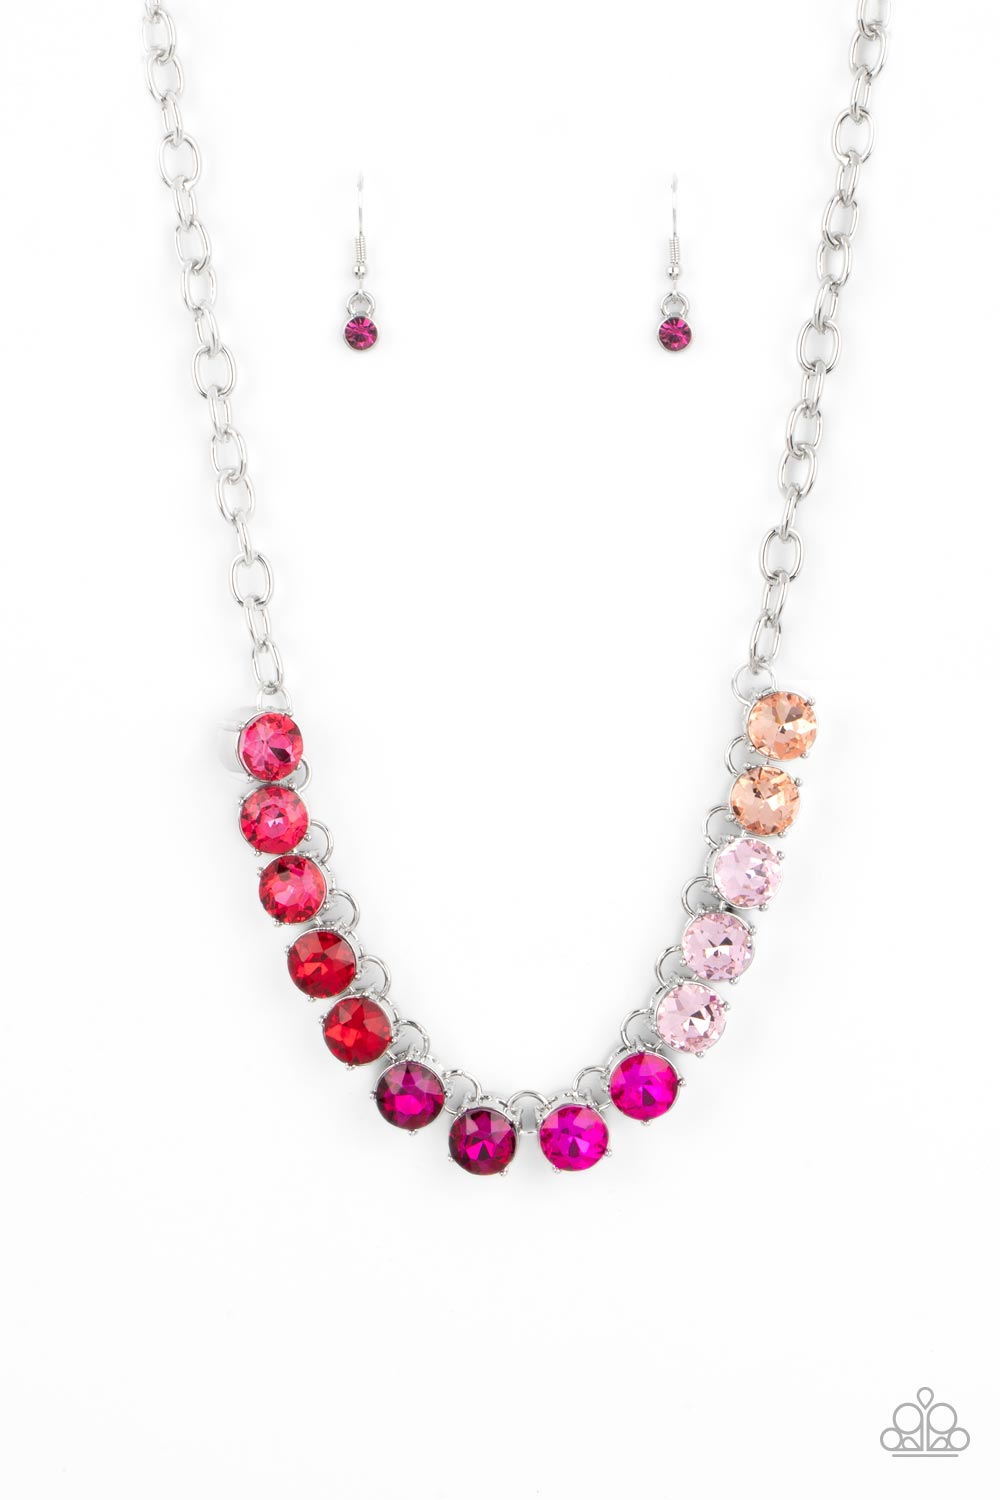 five-dollar-jewelry-rainbow-resplendence-pink-necklace-paparazzi-accessories